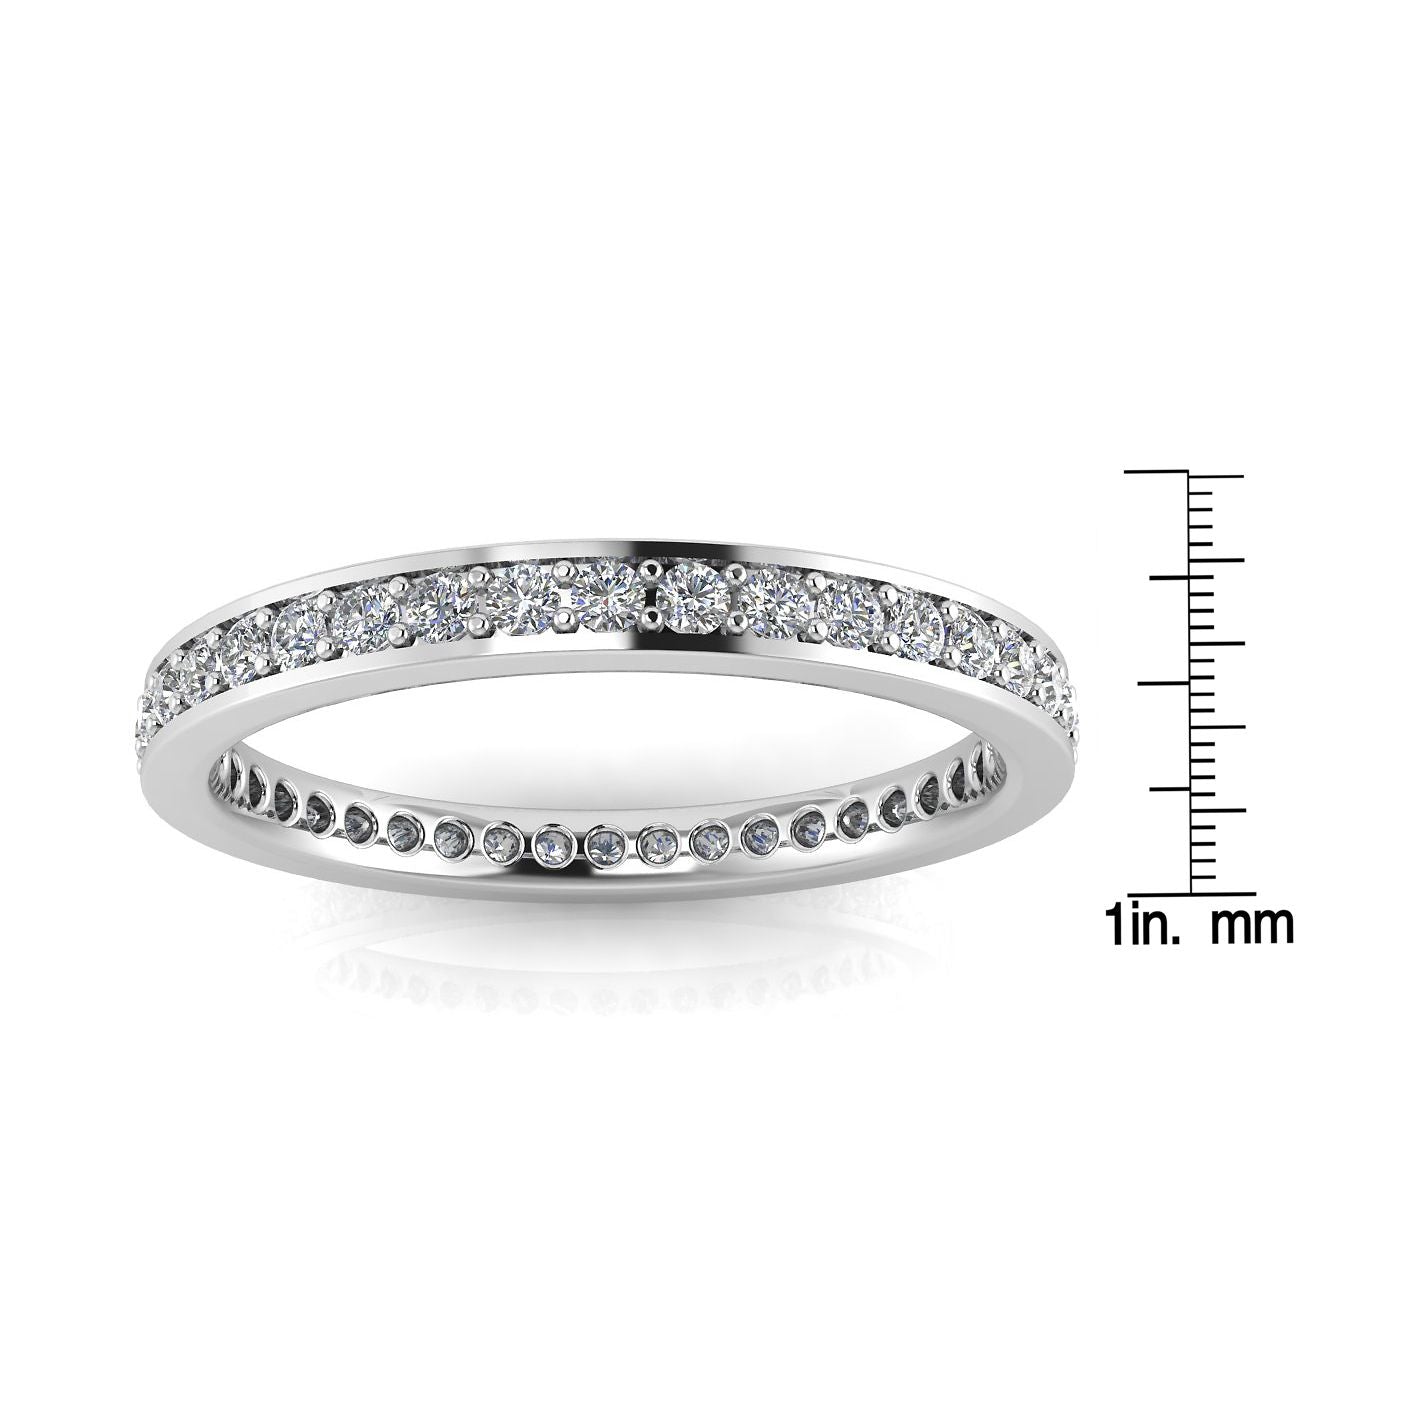 Round Brilliant Cut Diamond Channel Pave Set Eternity Ring In Platinum  (0.31ct. Tw.) Ring Size 6